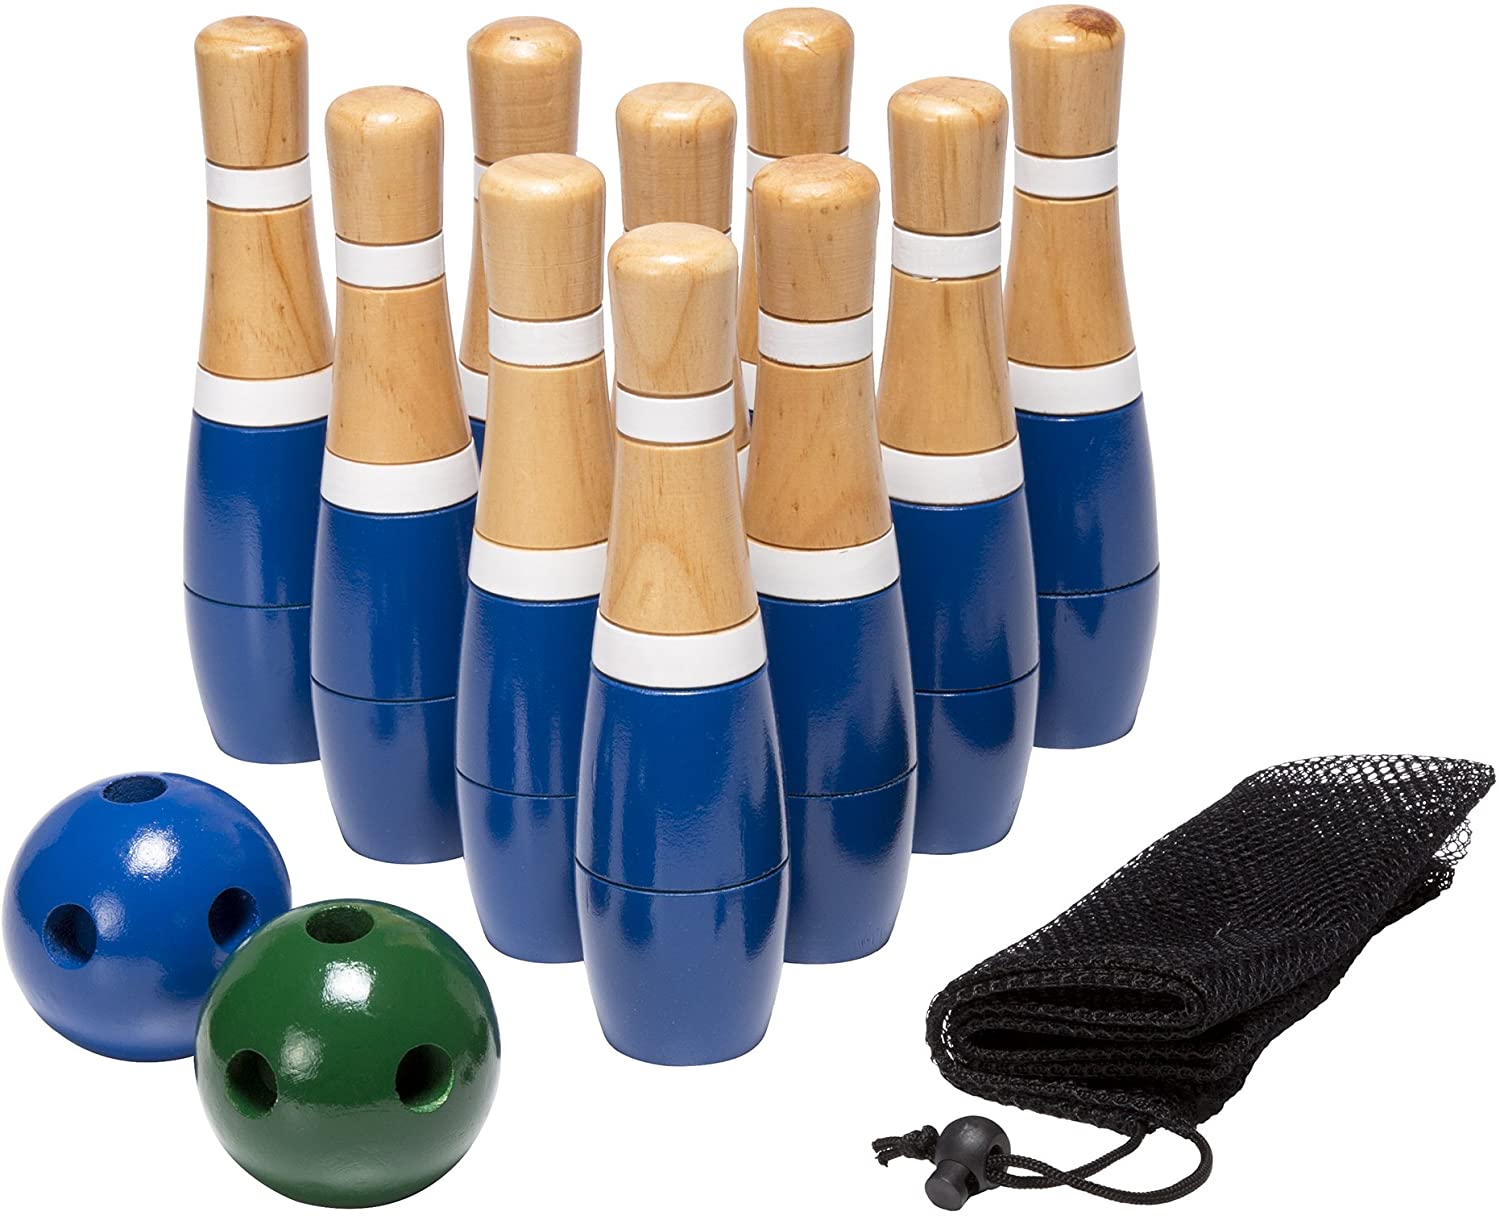 8 Inch Renewed Play! Adults 2 Balls and Mesh Bag Set by Hey Lawn Bowling Game/Skittle Ball- Indoor and Outdoor Fun for Toddlers 10 Wooden Pins Kids 